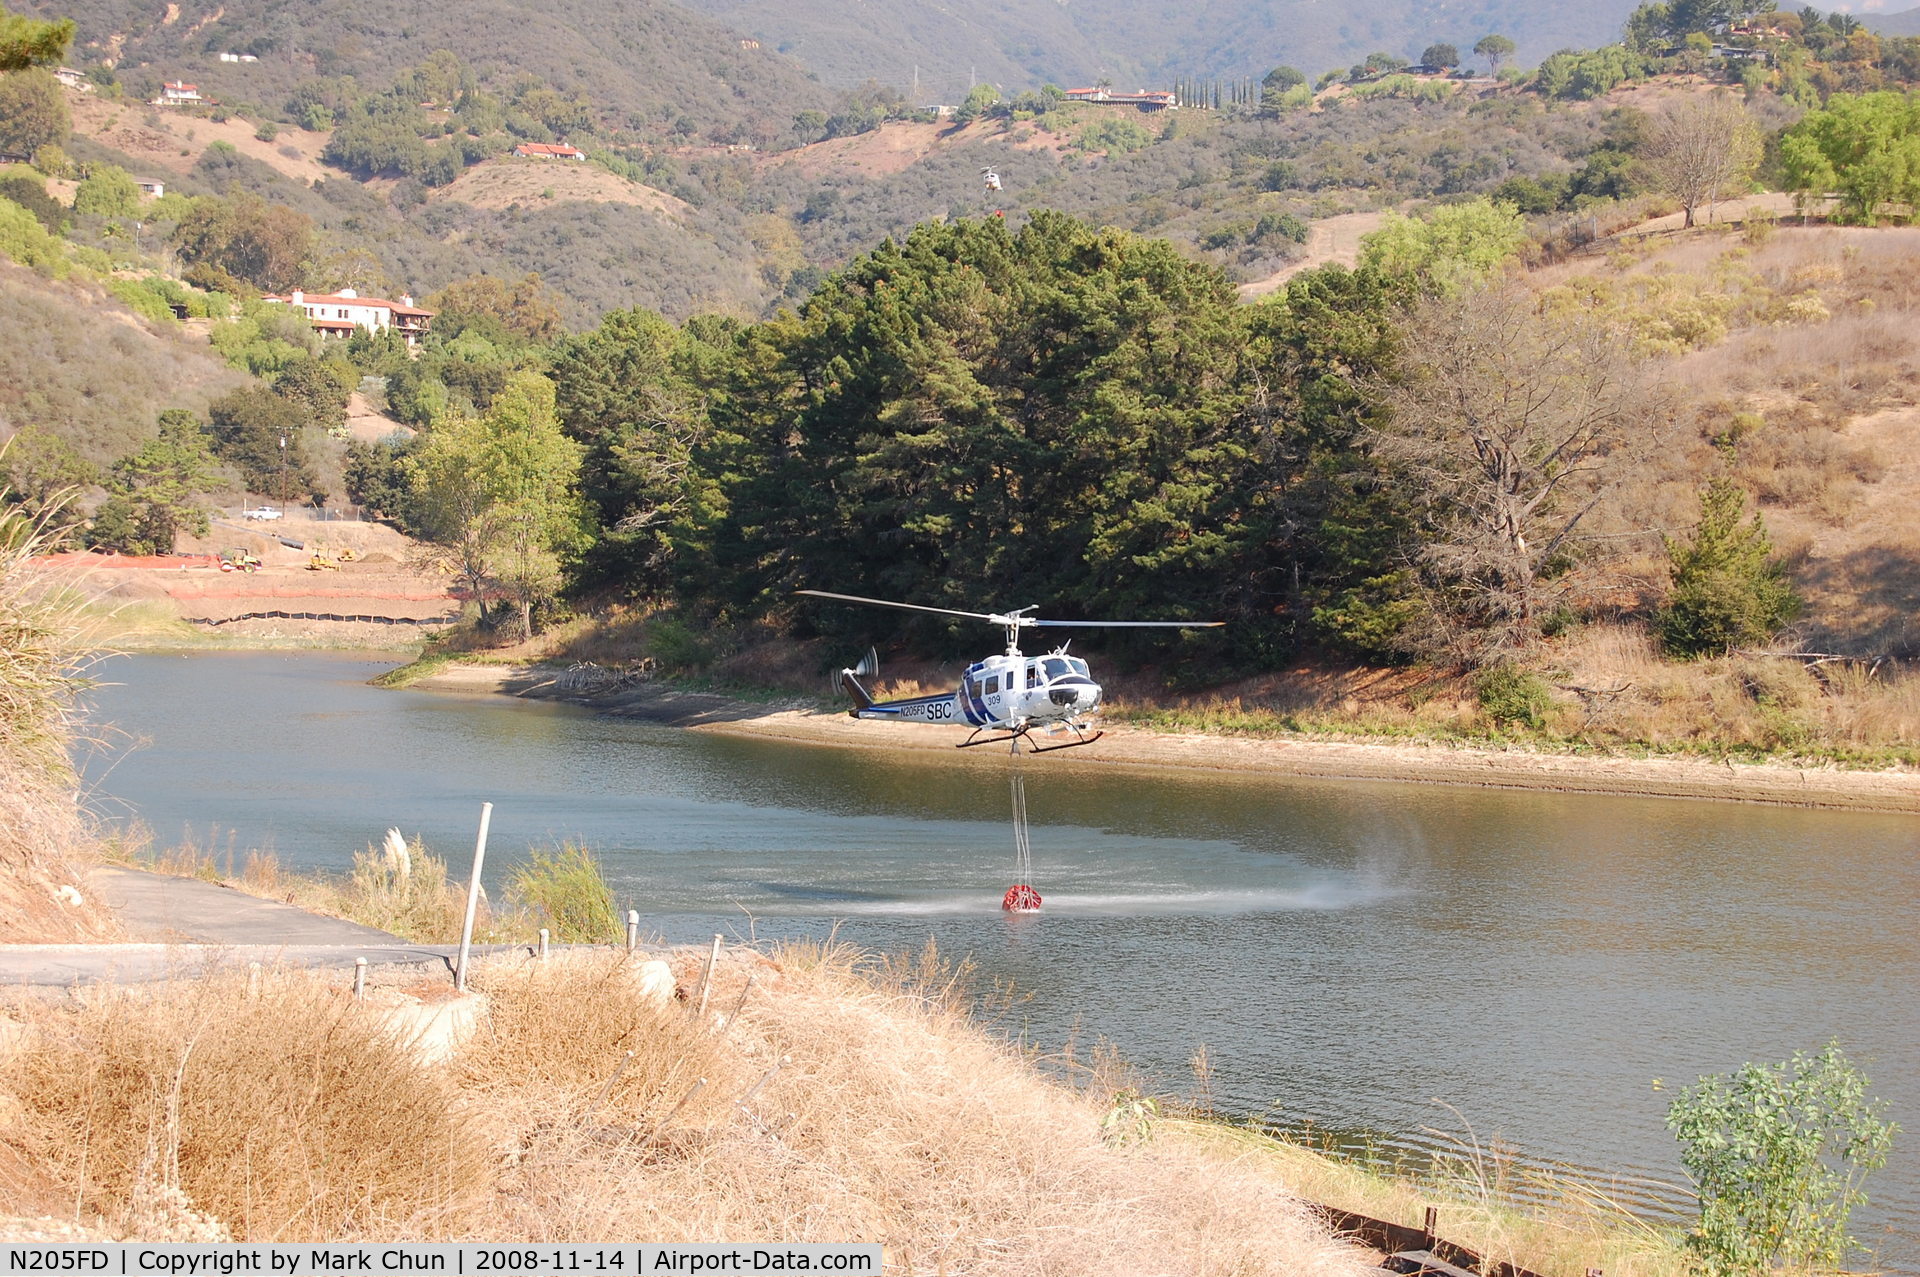 N205FD, Bell UH-1H Iroquois C/N 5305, Filling water bucket at Lauro Reservoir, Santa Barbara, CA. while fighting Tea Fire.